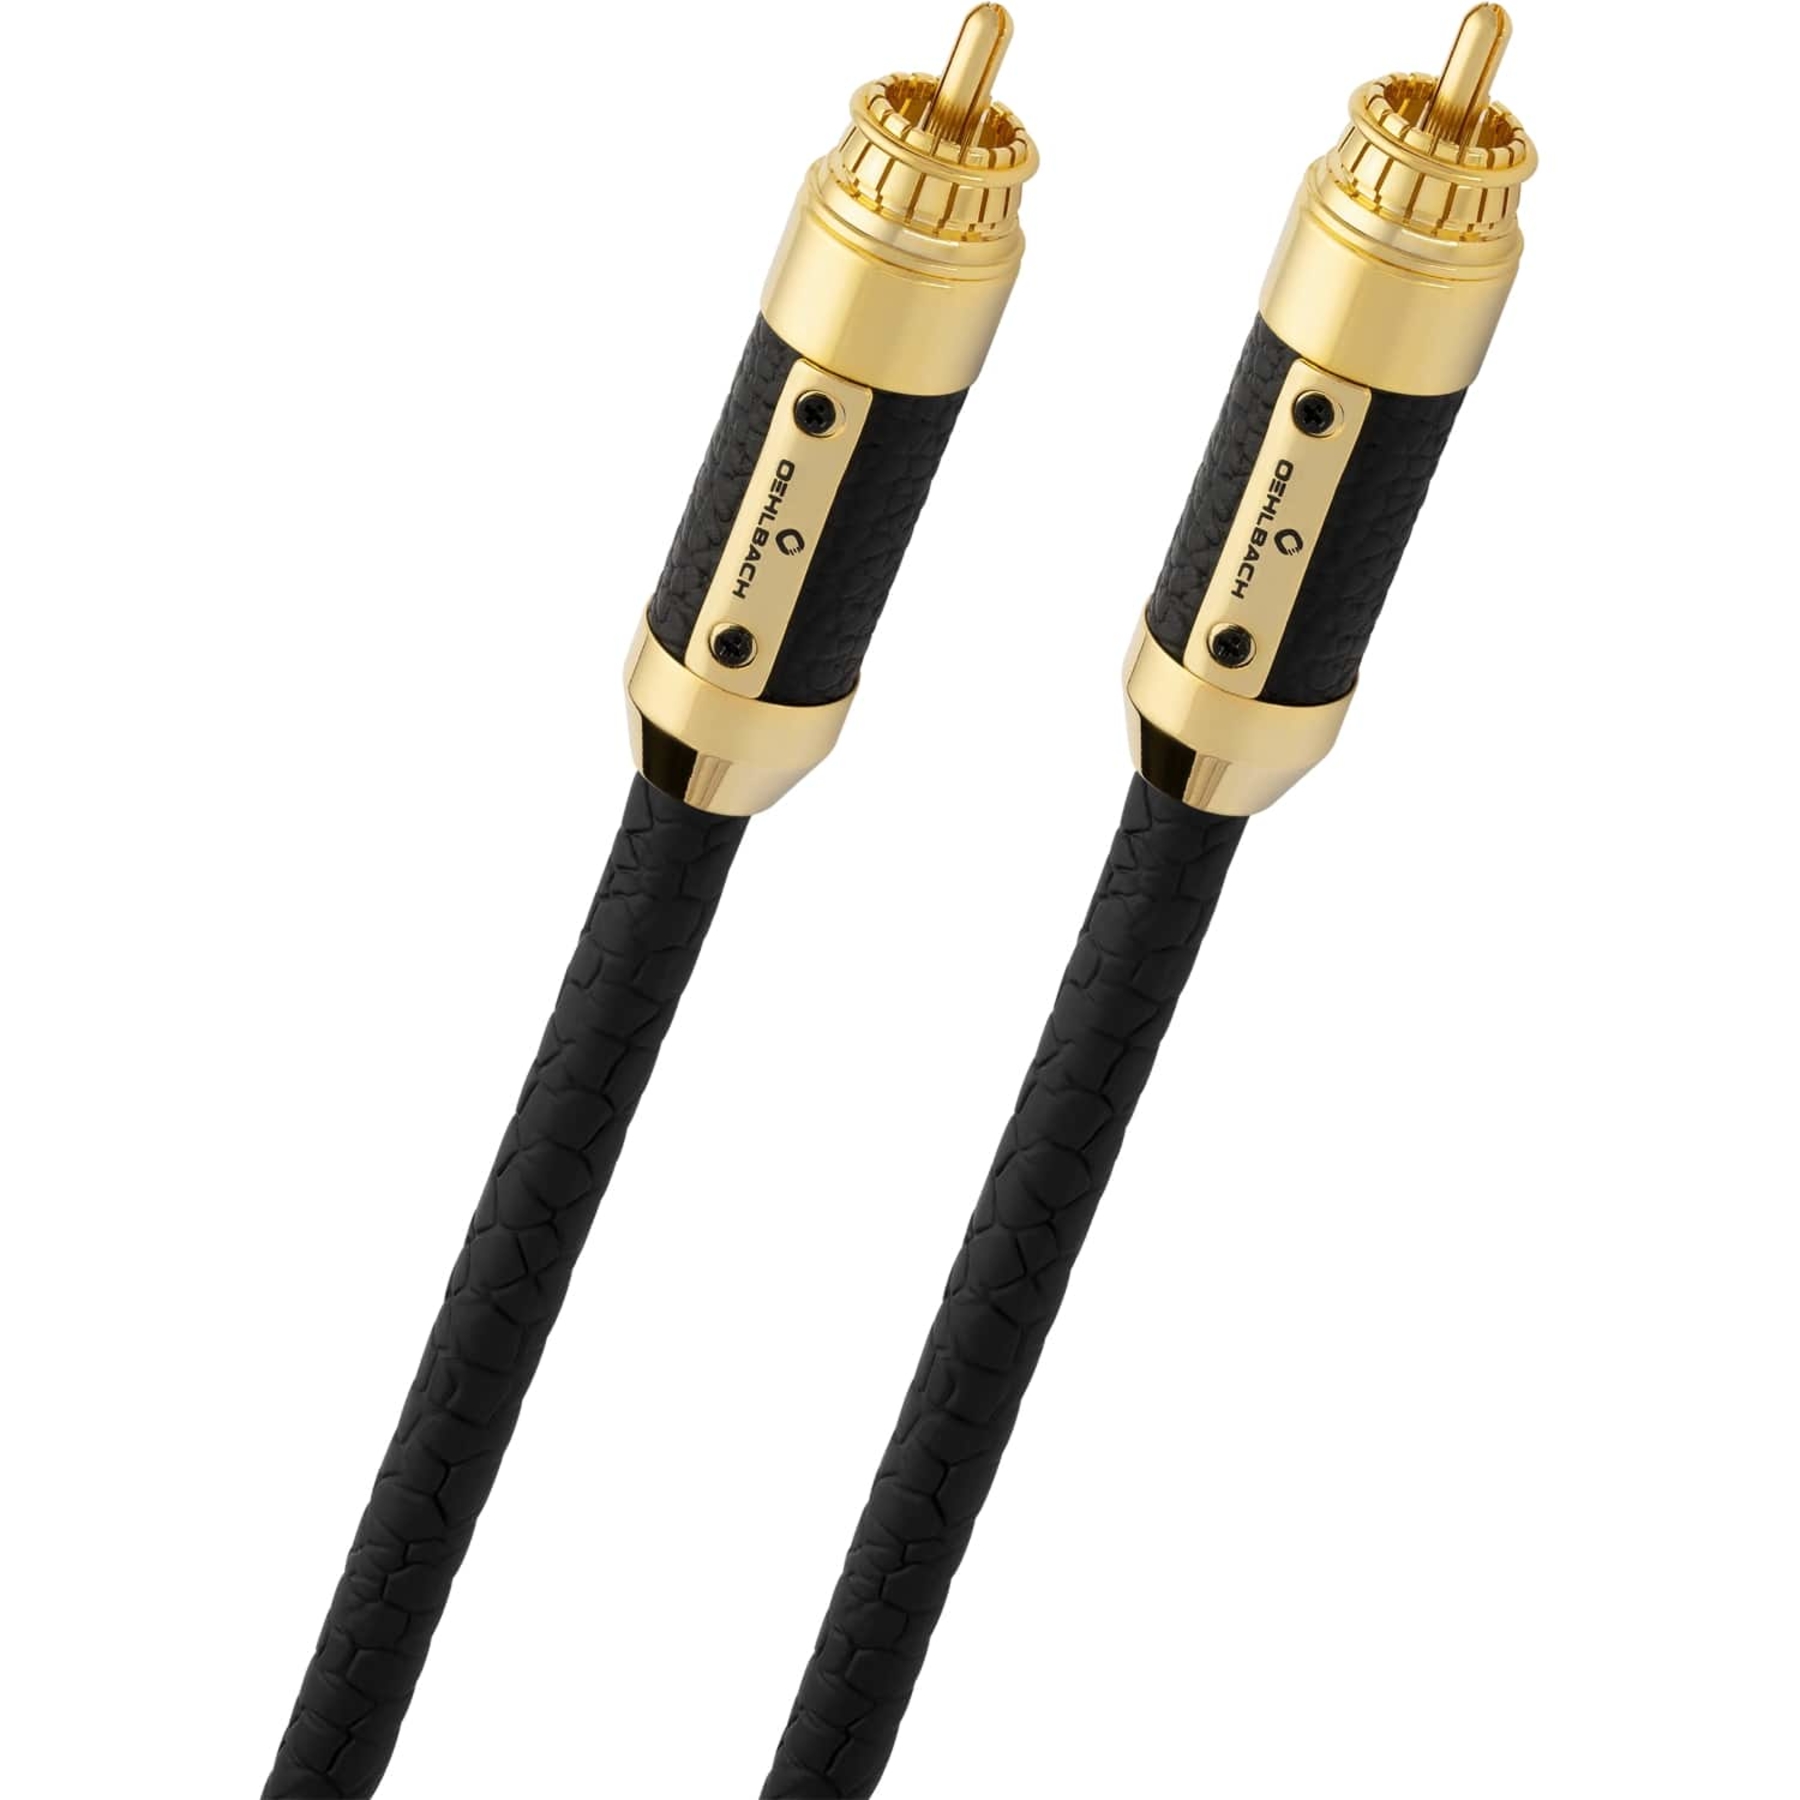 Кабели межблочные аудио Oehlbach STATE OF THE ART XXL Black Connection Cable RCA, 1x1,0m, gold, D1C13826 кабели межблочные аудио oehlbach state of the art xxl cable rca 2x2 00m gold d1c13116